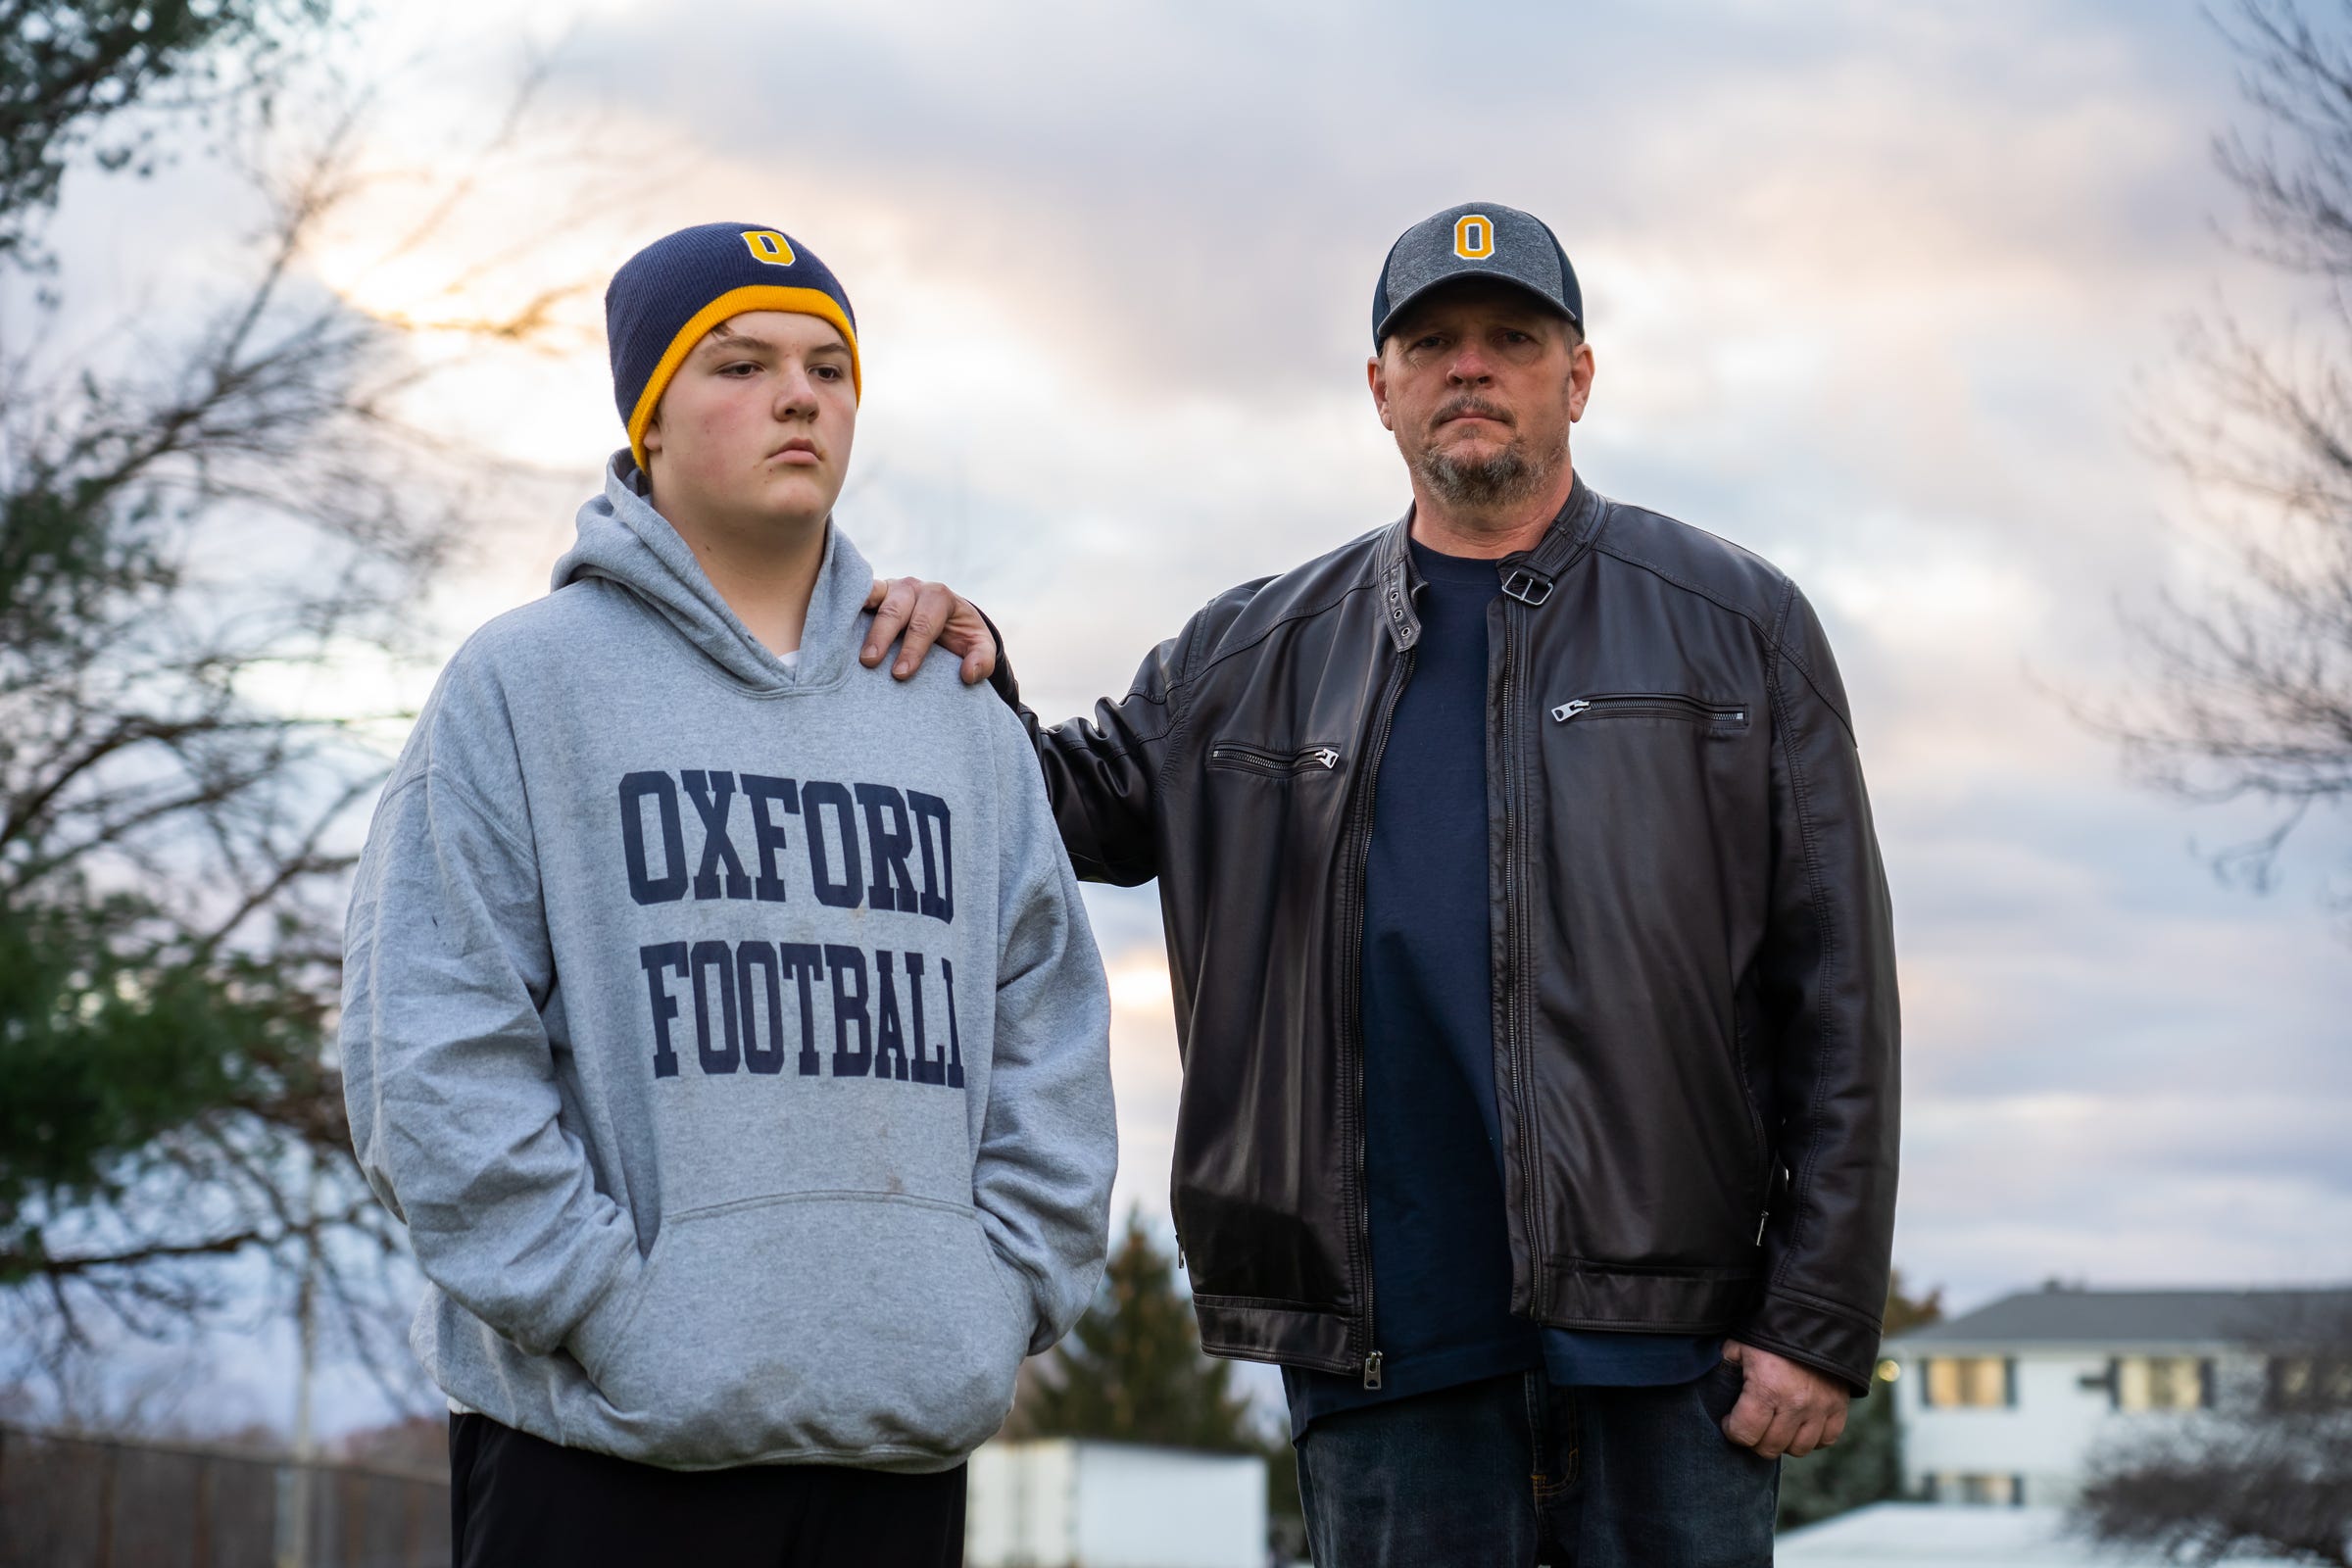 Stephen Cumbey, of Oxford, stands with his son, Nolan Cumbey, who was in school with his brother at Oxford High School during the shooting in which four students were killed after a classmate opened fire injuring multiple others.